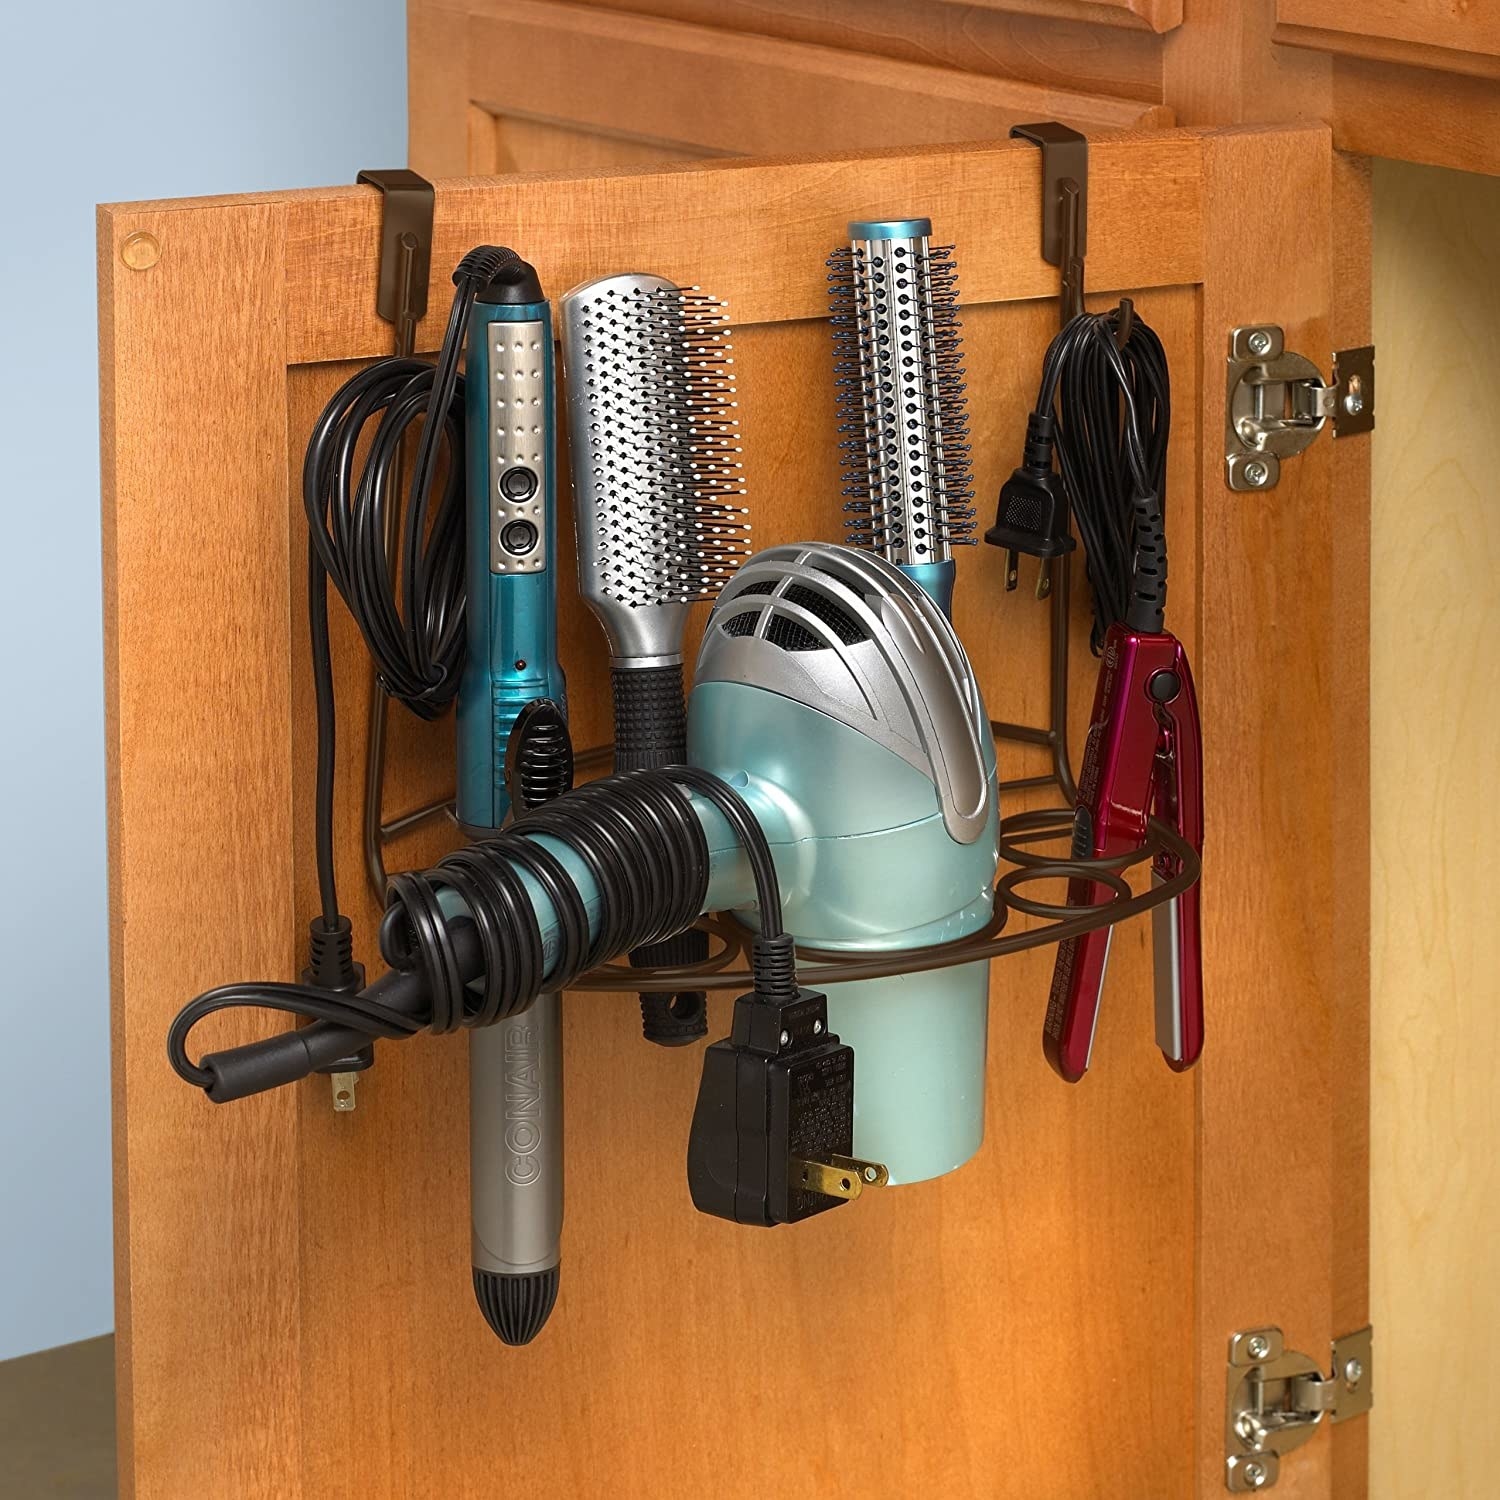 A hot tool station with brushes, a blow dryer, and hot tools inside